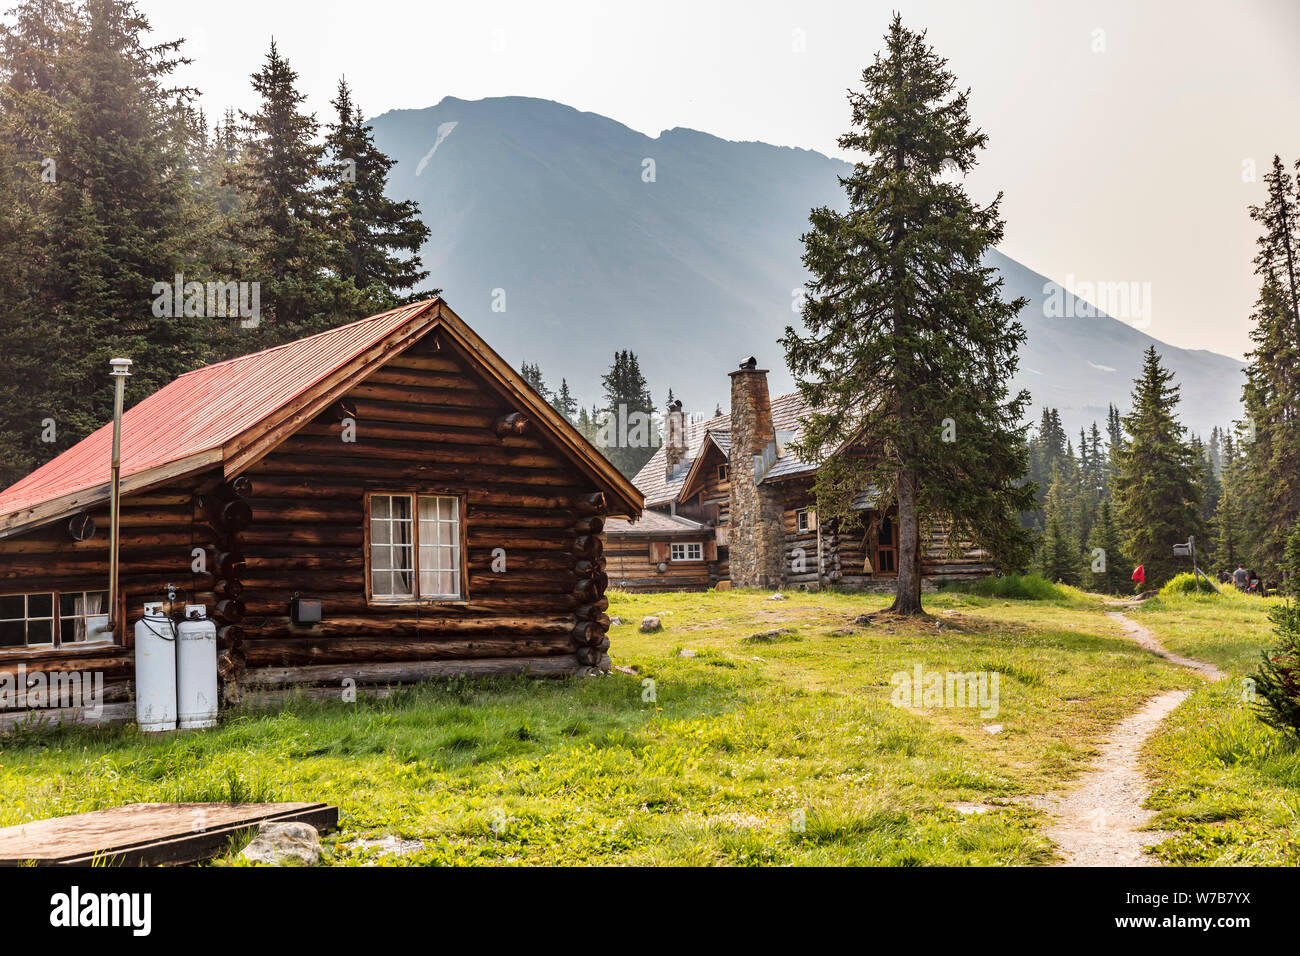 Bunkhouse and main lodge at Skoki Ski Lodge, a remote backcountry lodge located near Lake Louise in Banff National Park, Alberta, Canada. Stock Photo